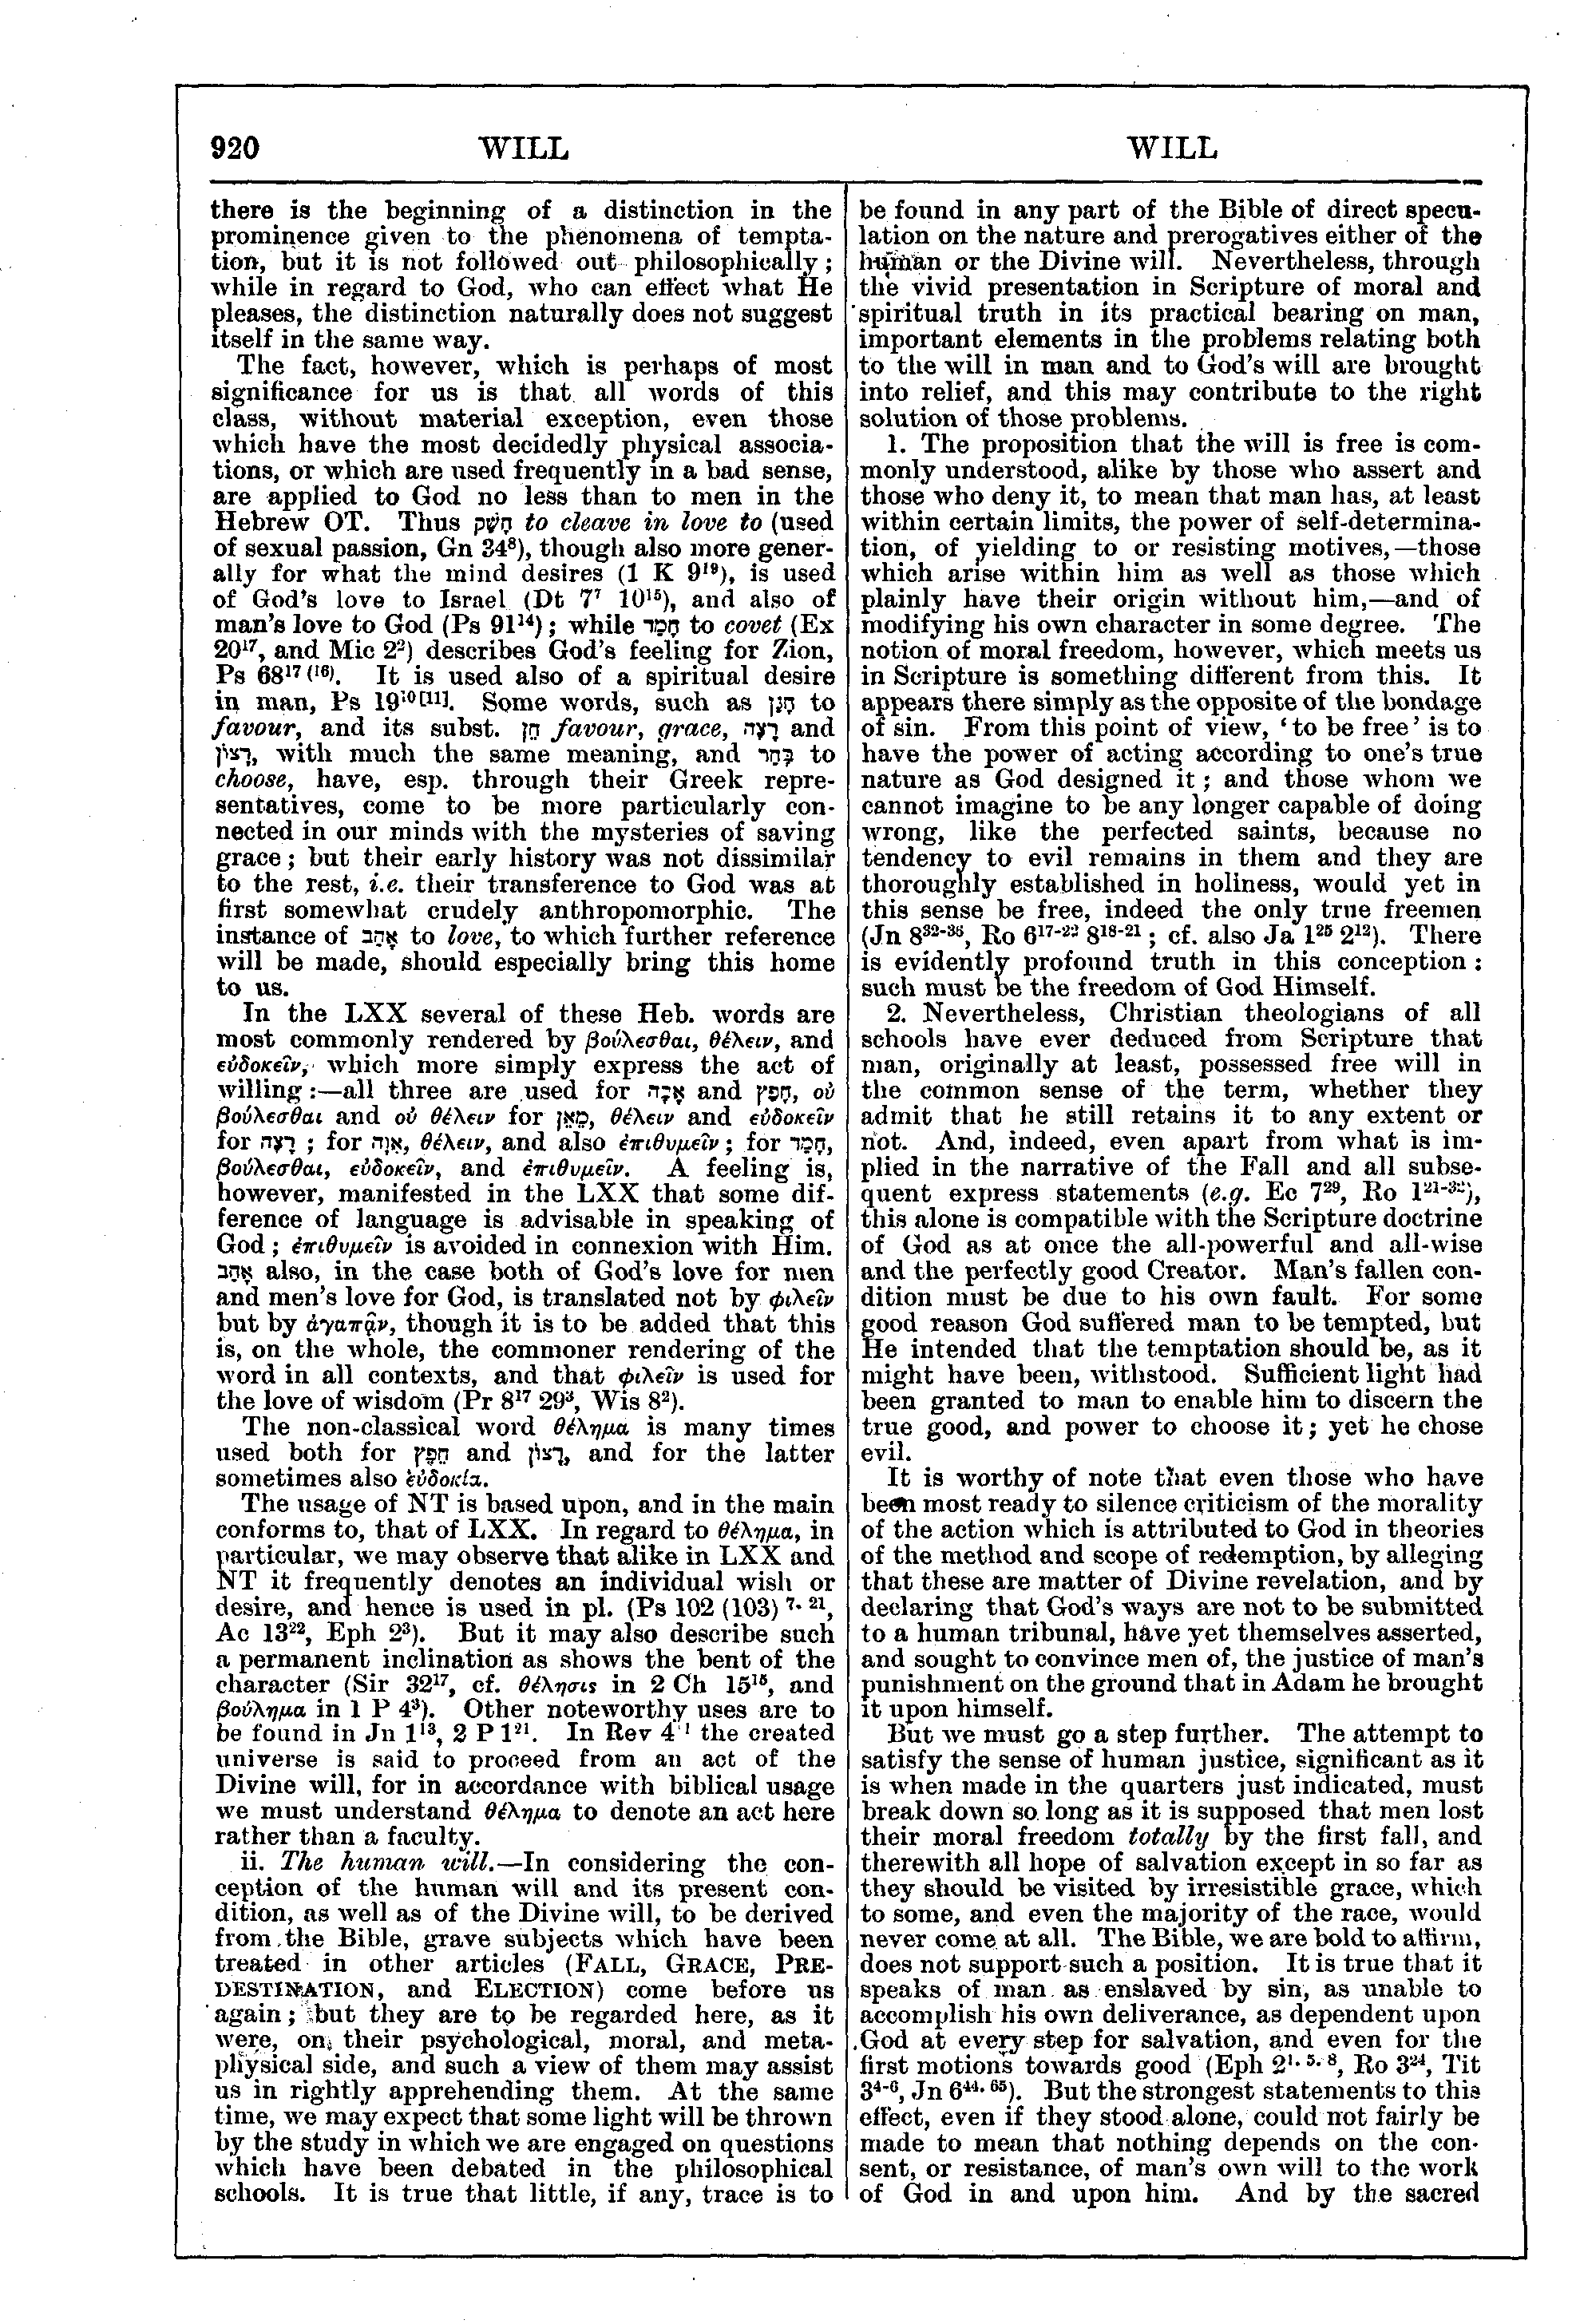 Image of page 920